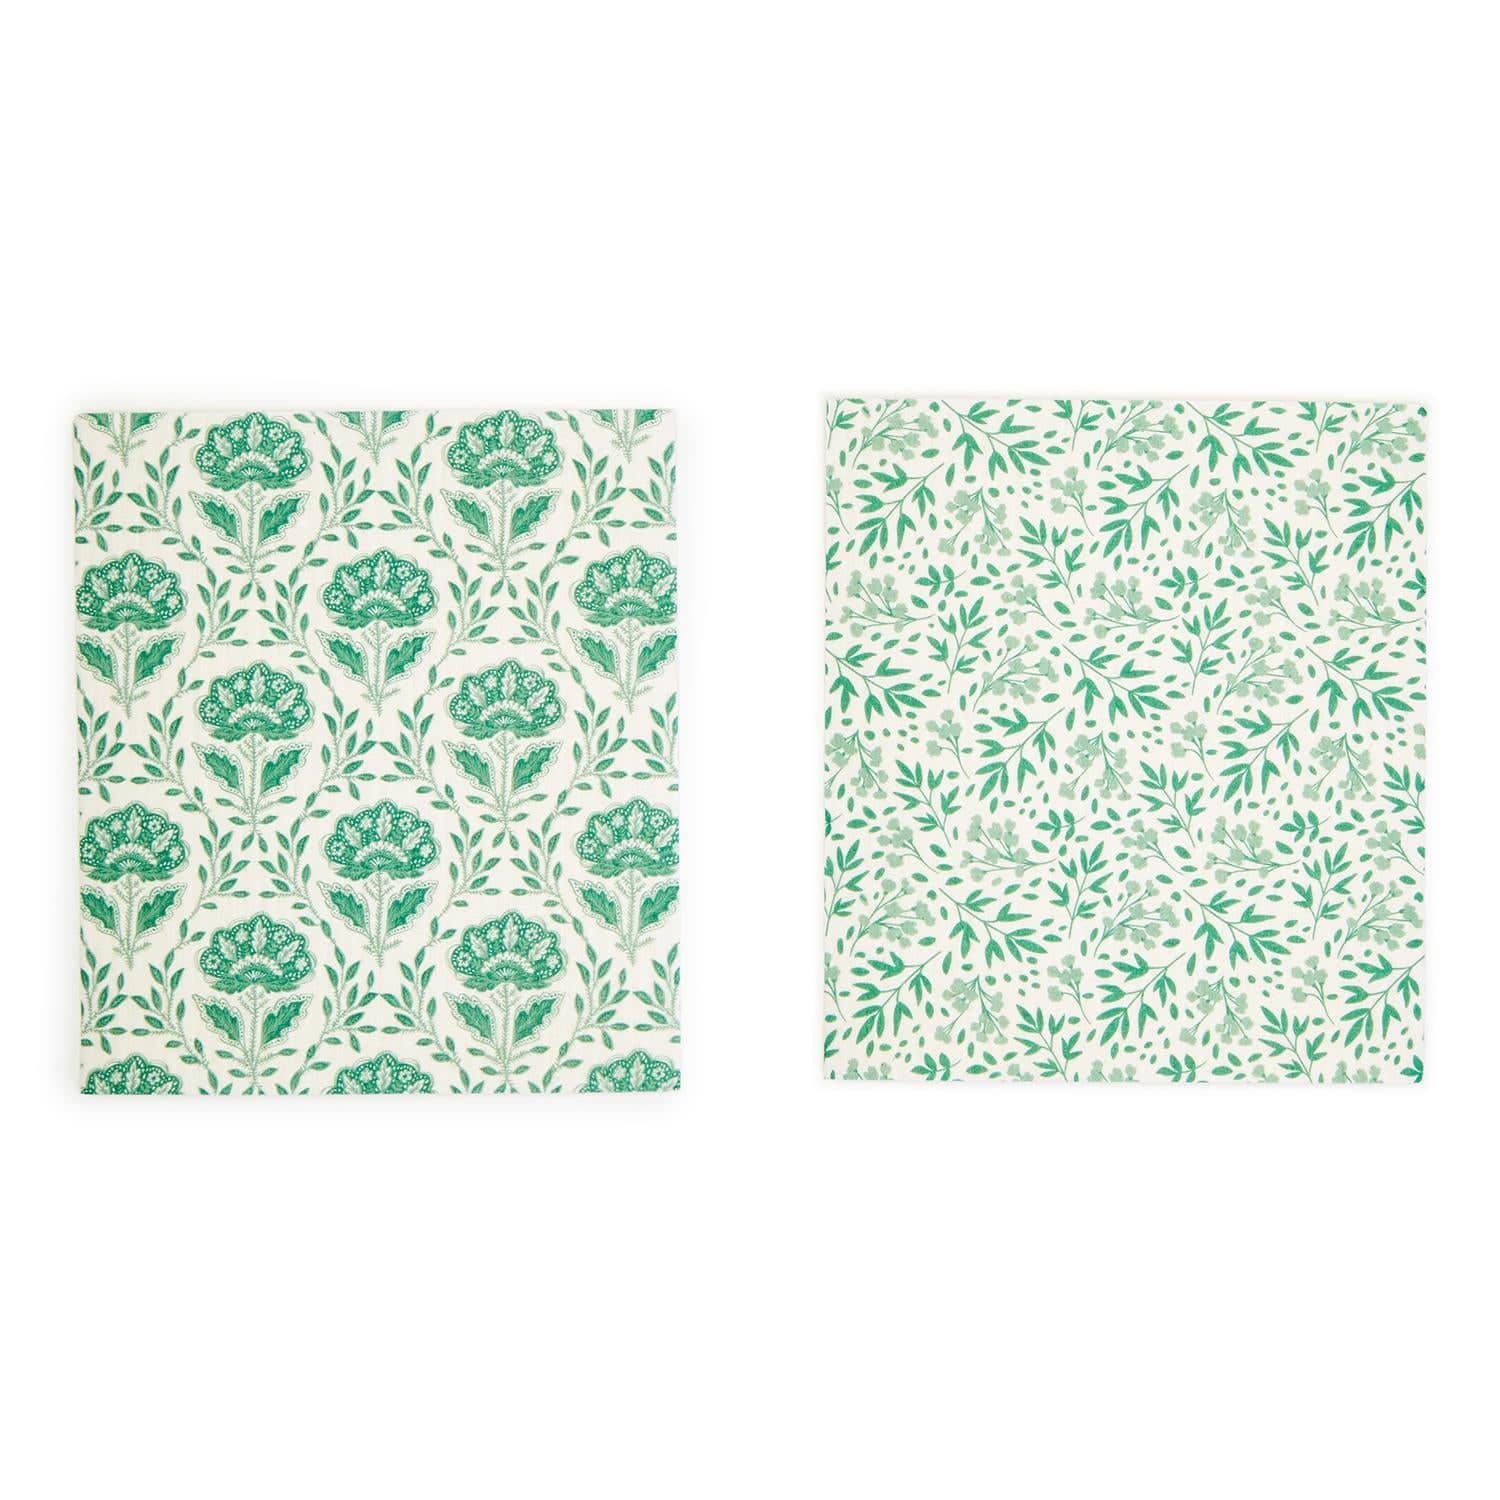 Multipurpose Kitchen Cloth - Countryside - The Preppy Bunny